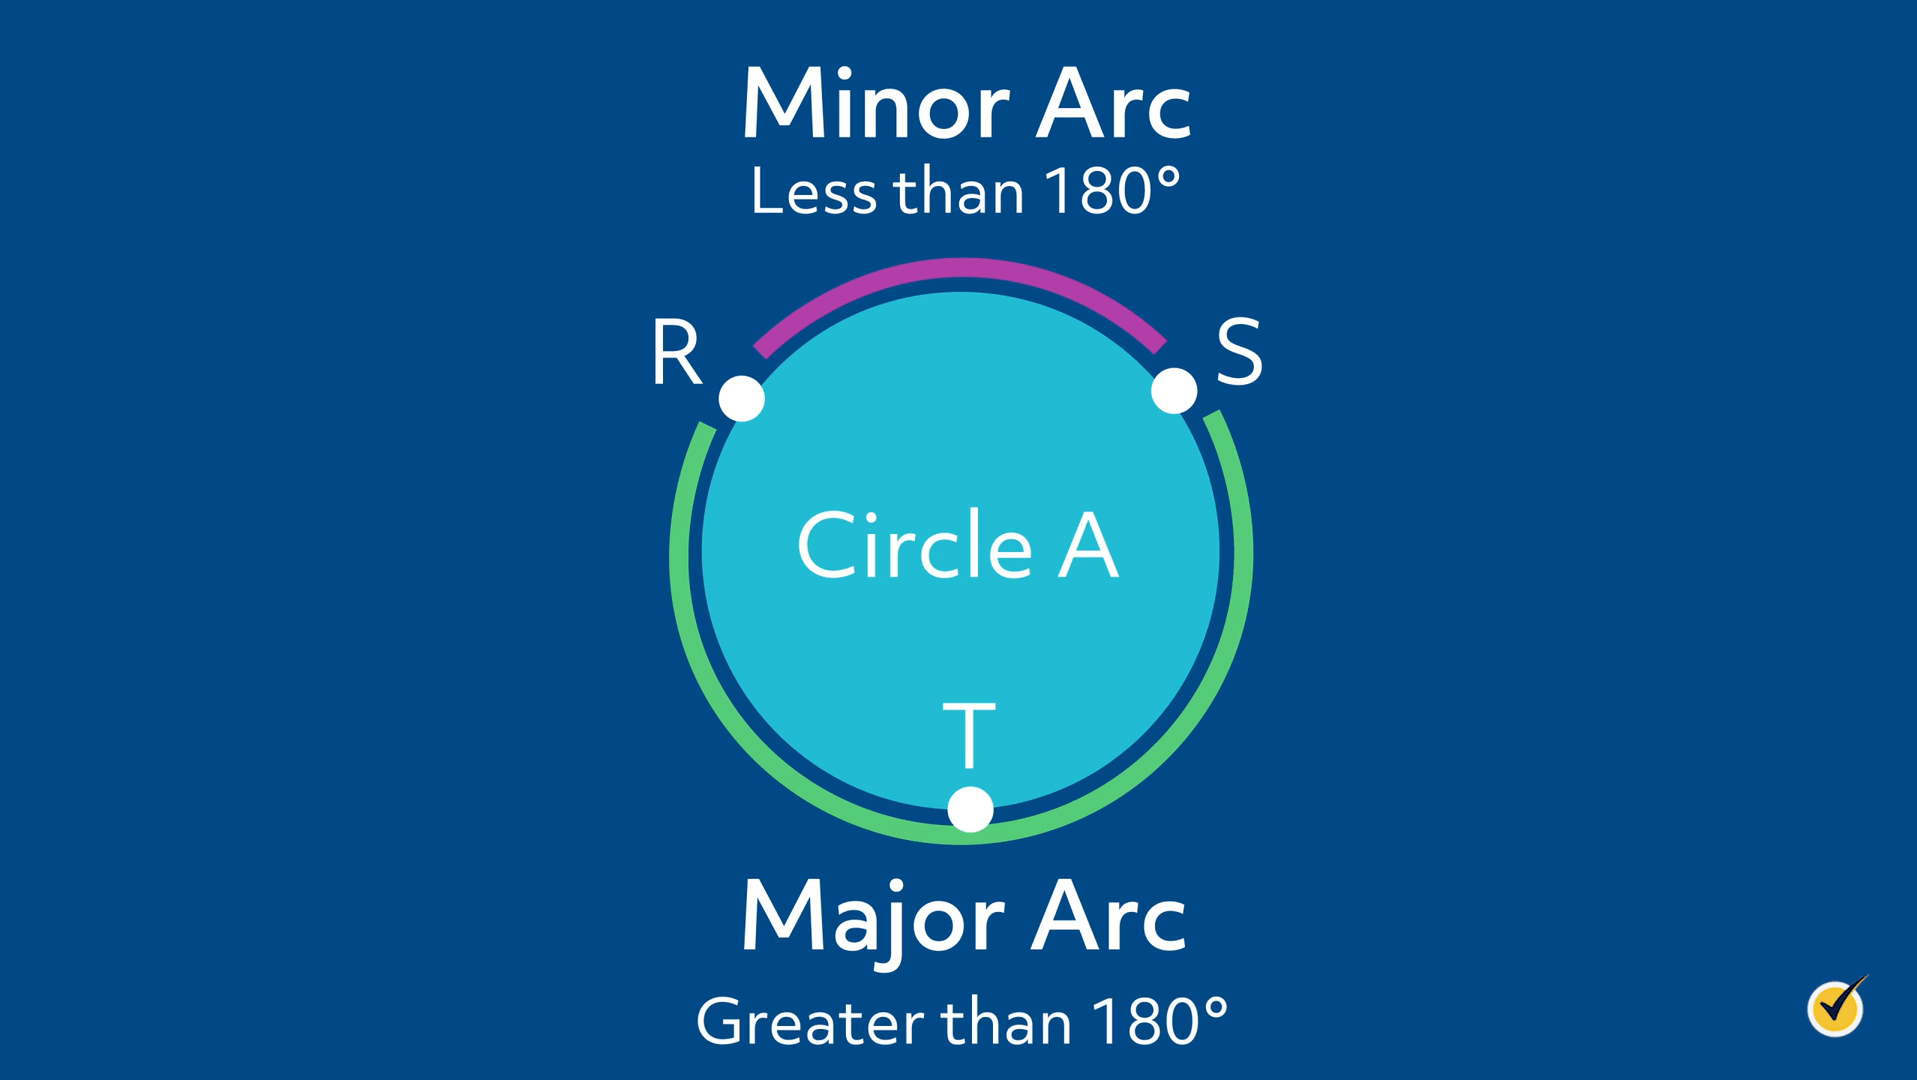 Image showing that a minor arc is less than 180 degrees, and a major arc is greater than 180. 